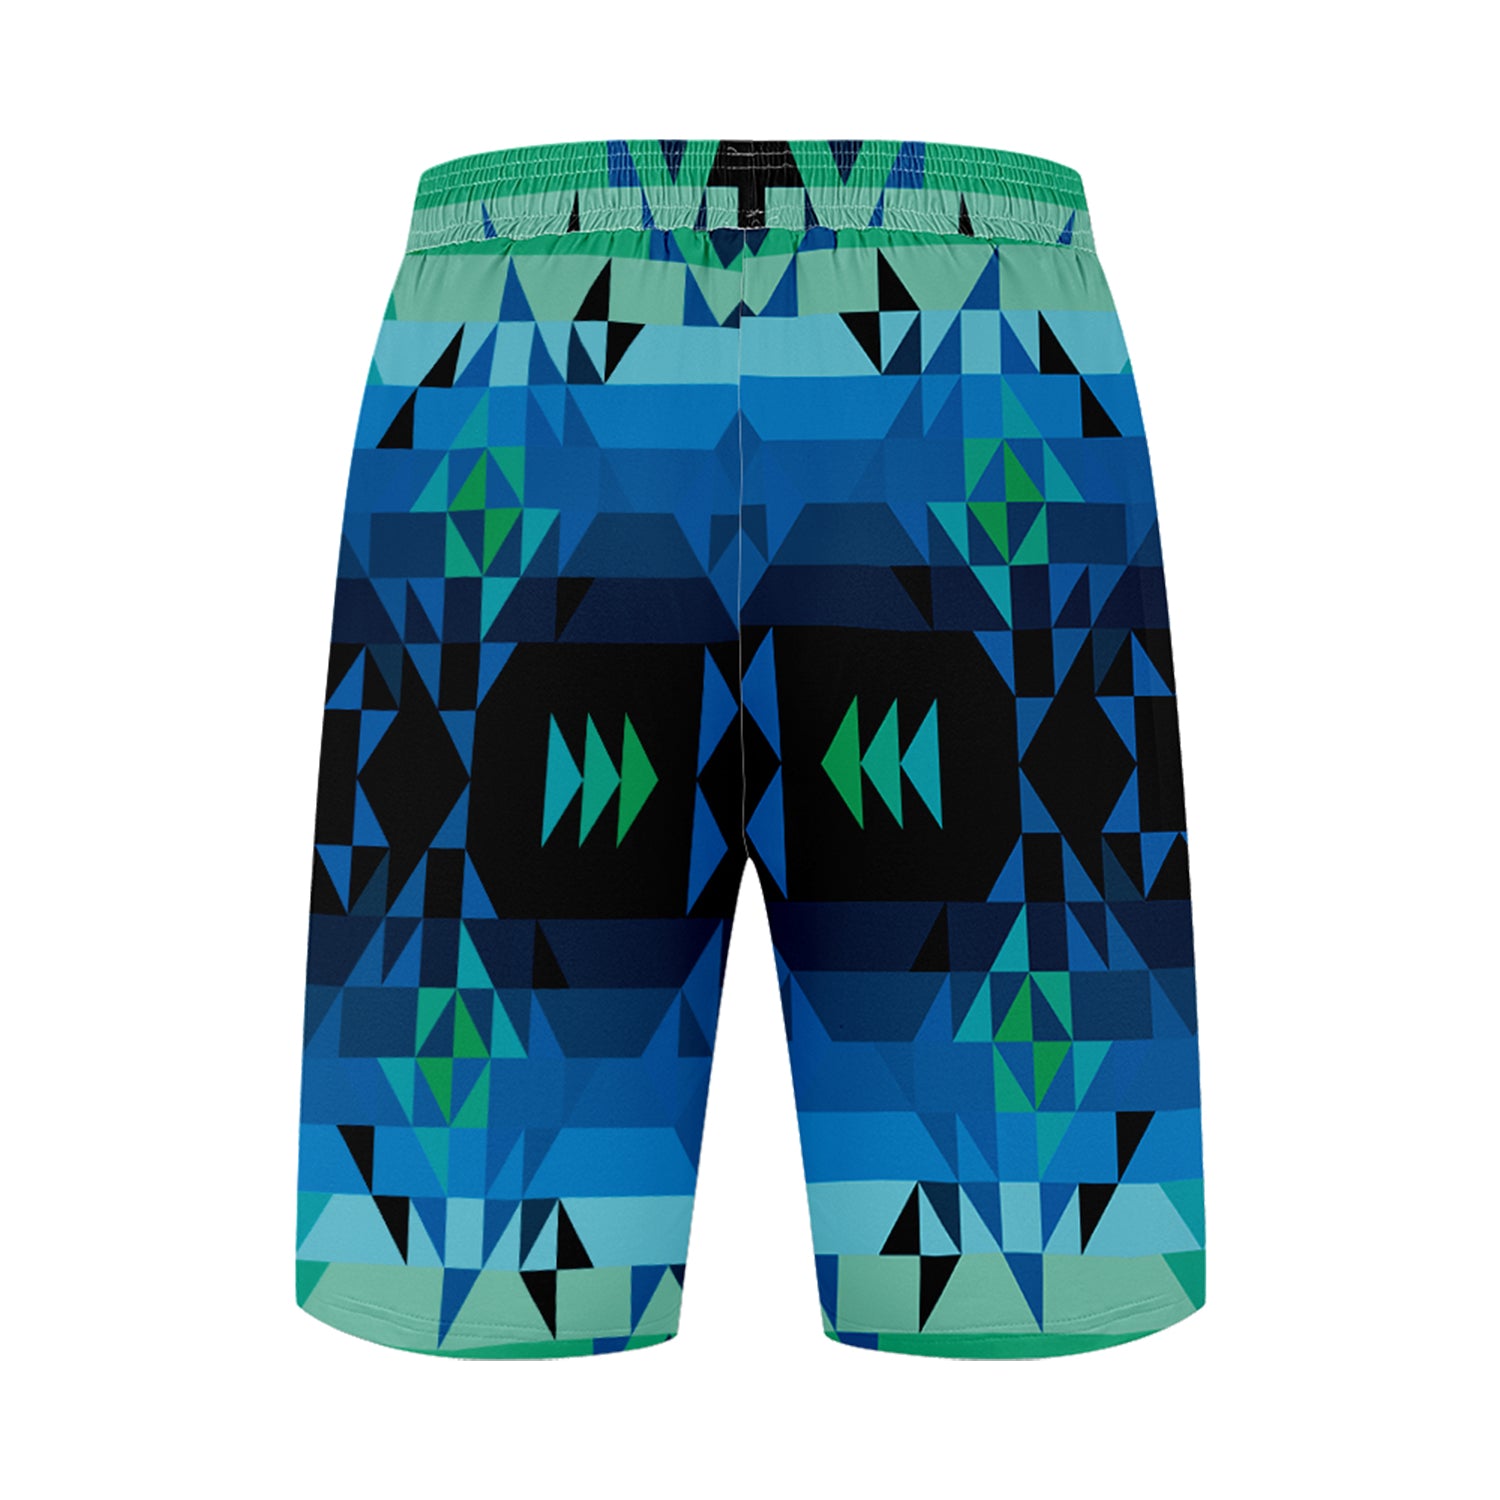 Green Star Athletic Shorts with Pockets